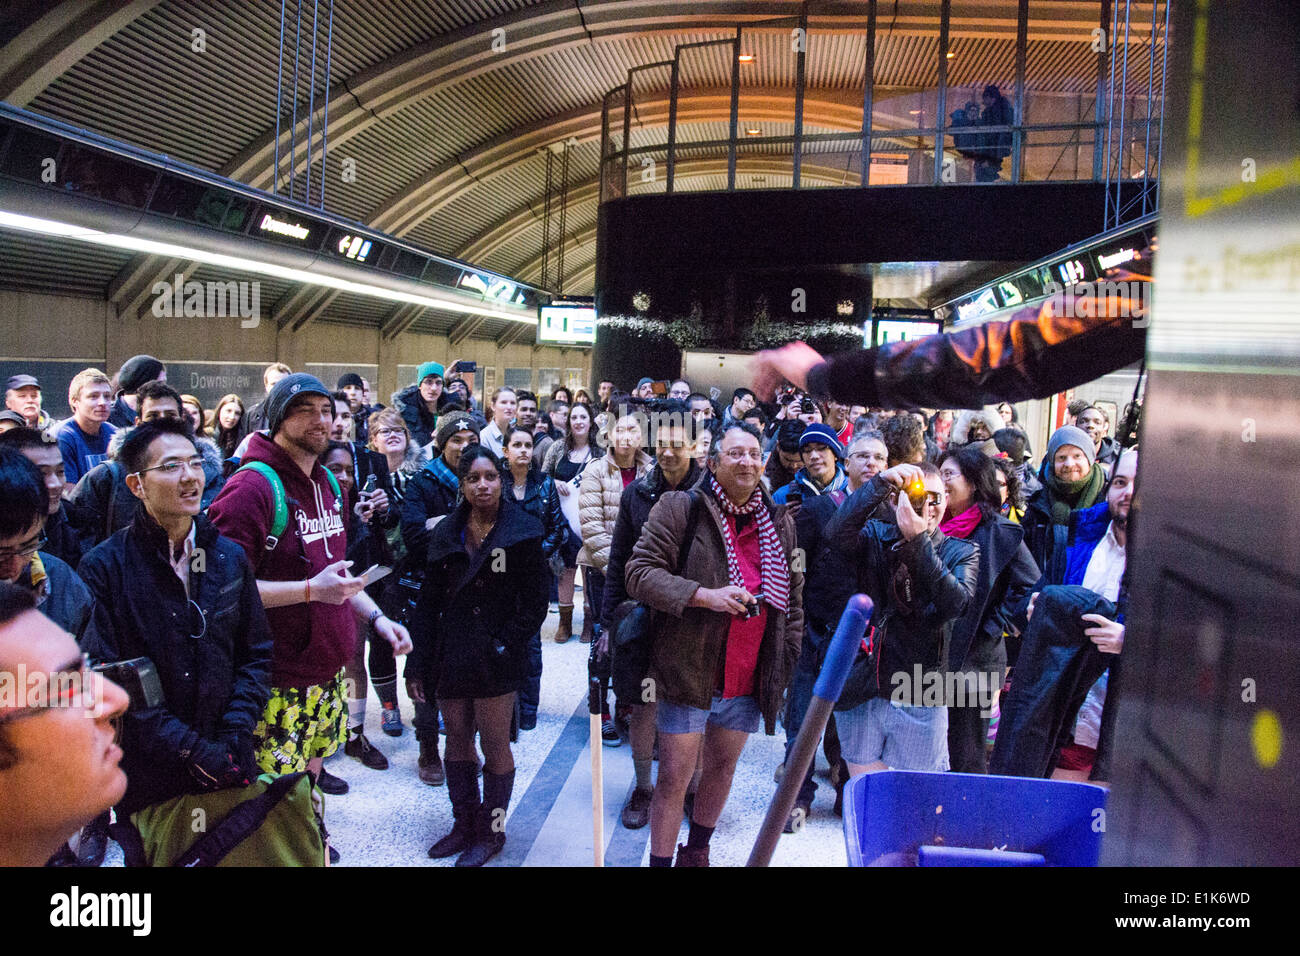 Toronto, Canada. 12th January 2014 - Several hundred people turned out to join the No Pants Subway Ride in Toronto. Stock Photo